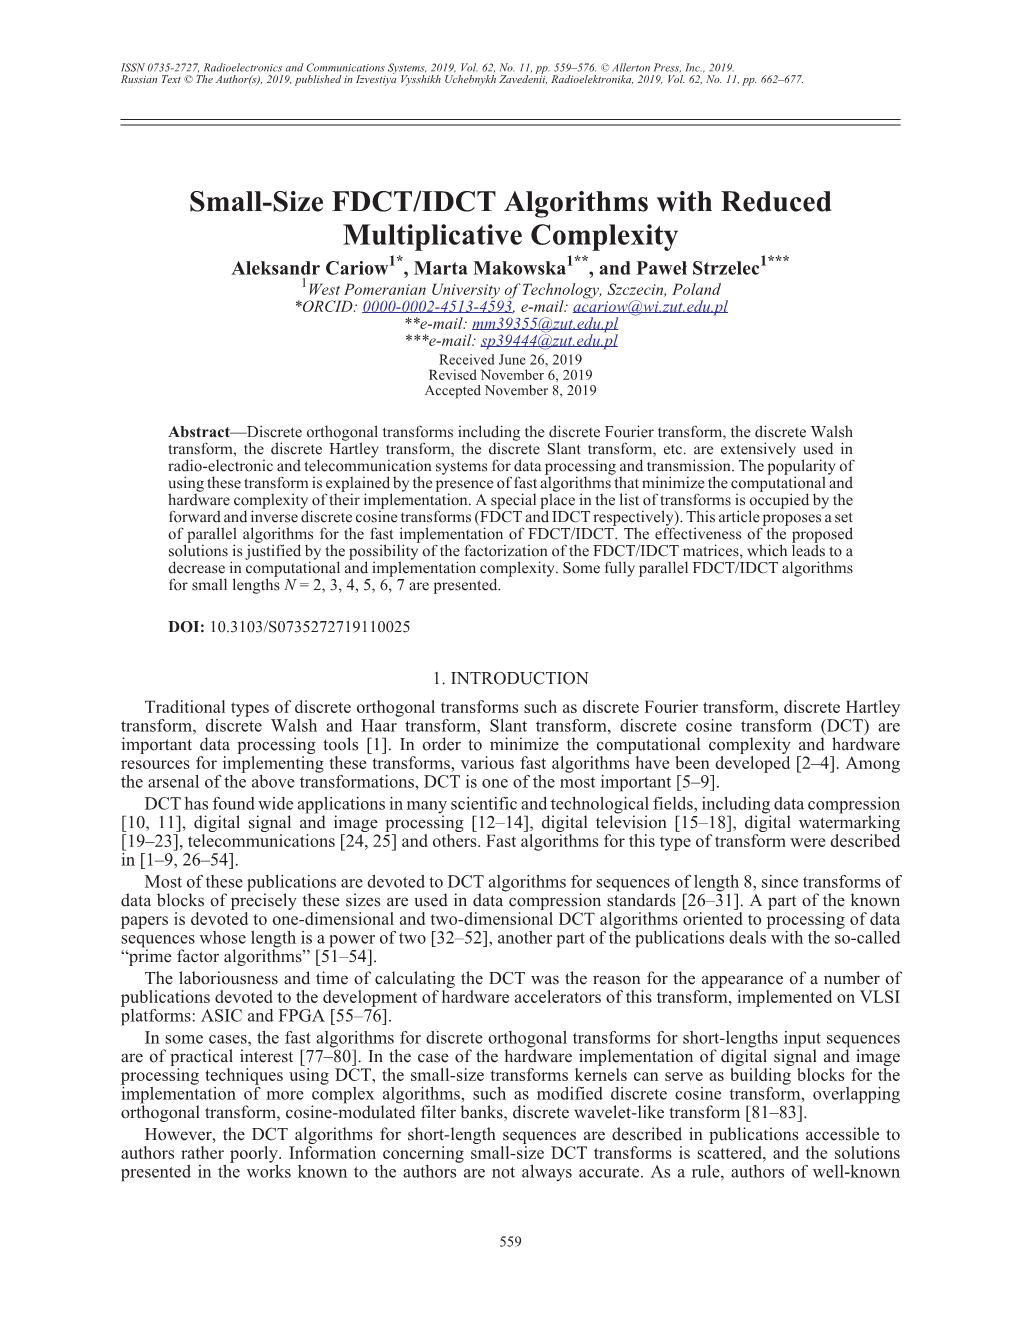 Small-Size FDCT/IDCT Algorithms with Reduced Multiplicative